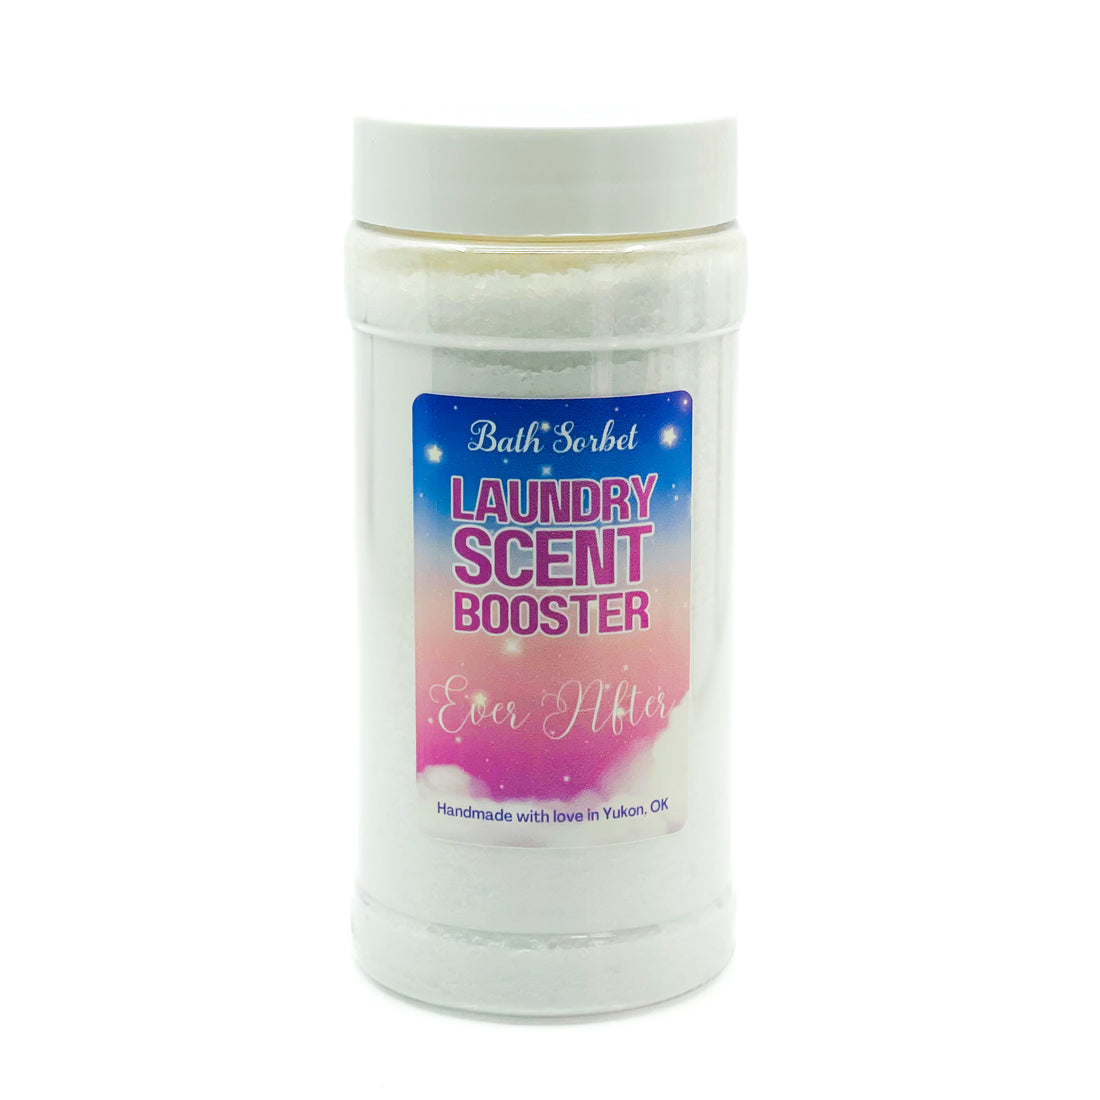 Ever After Laundry Scent Booster